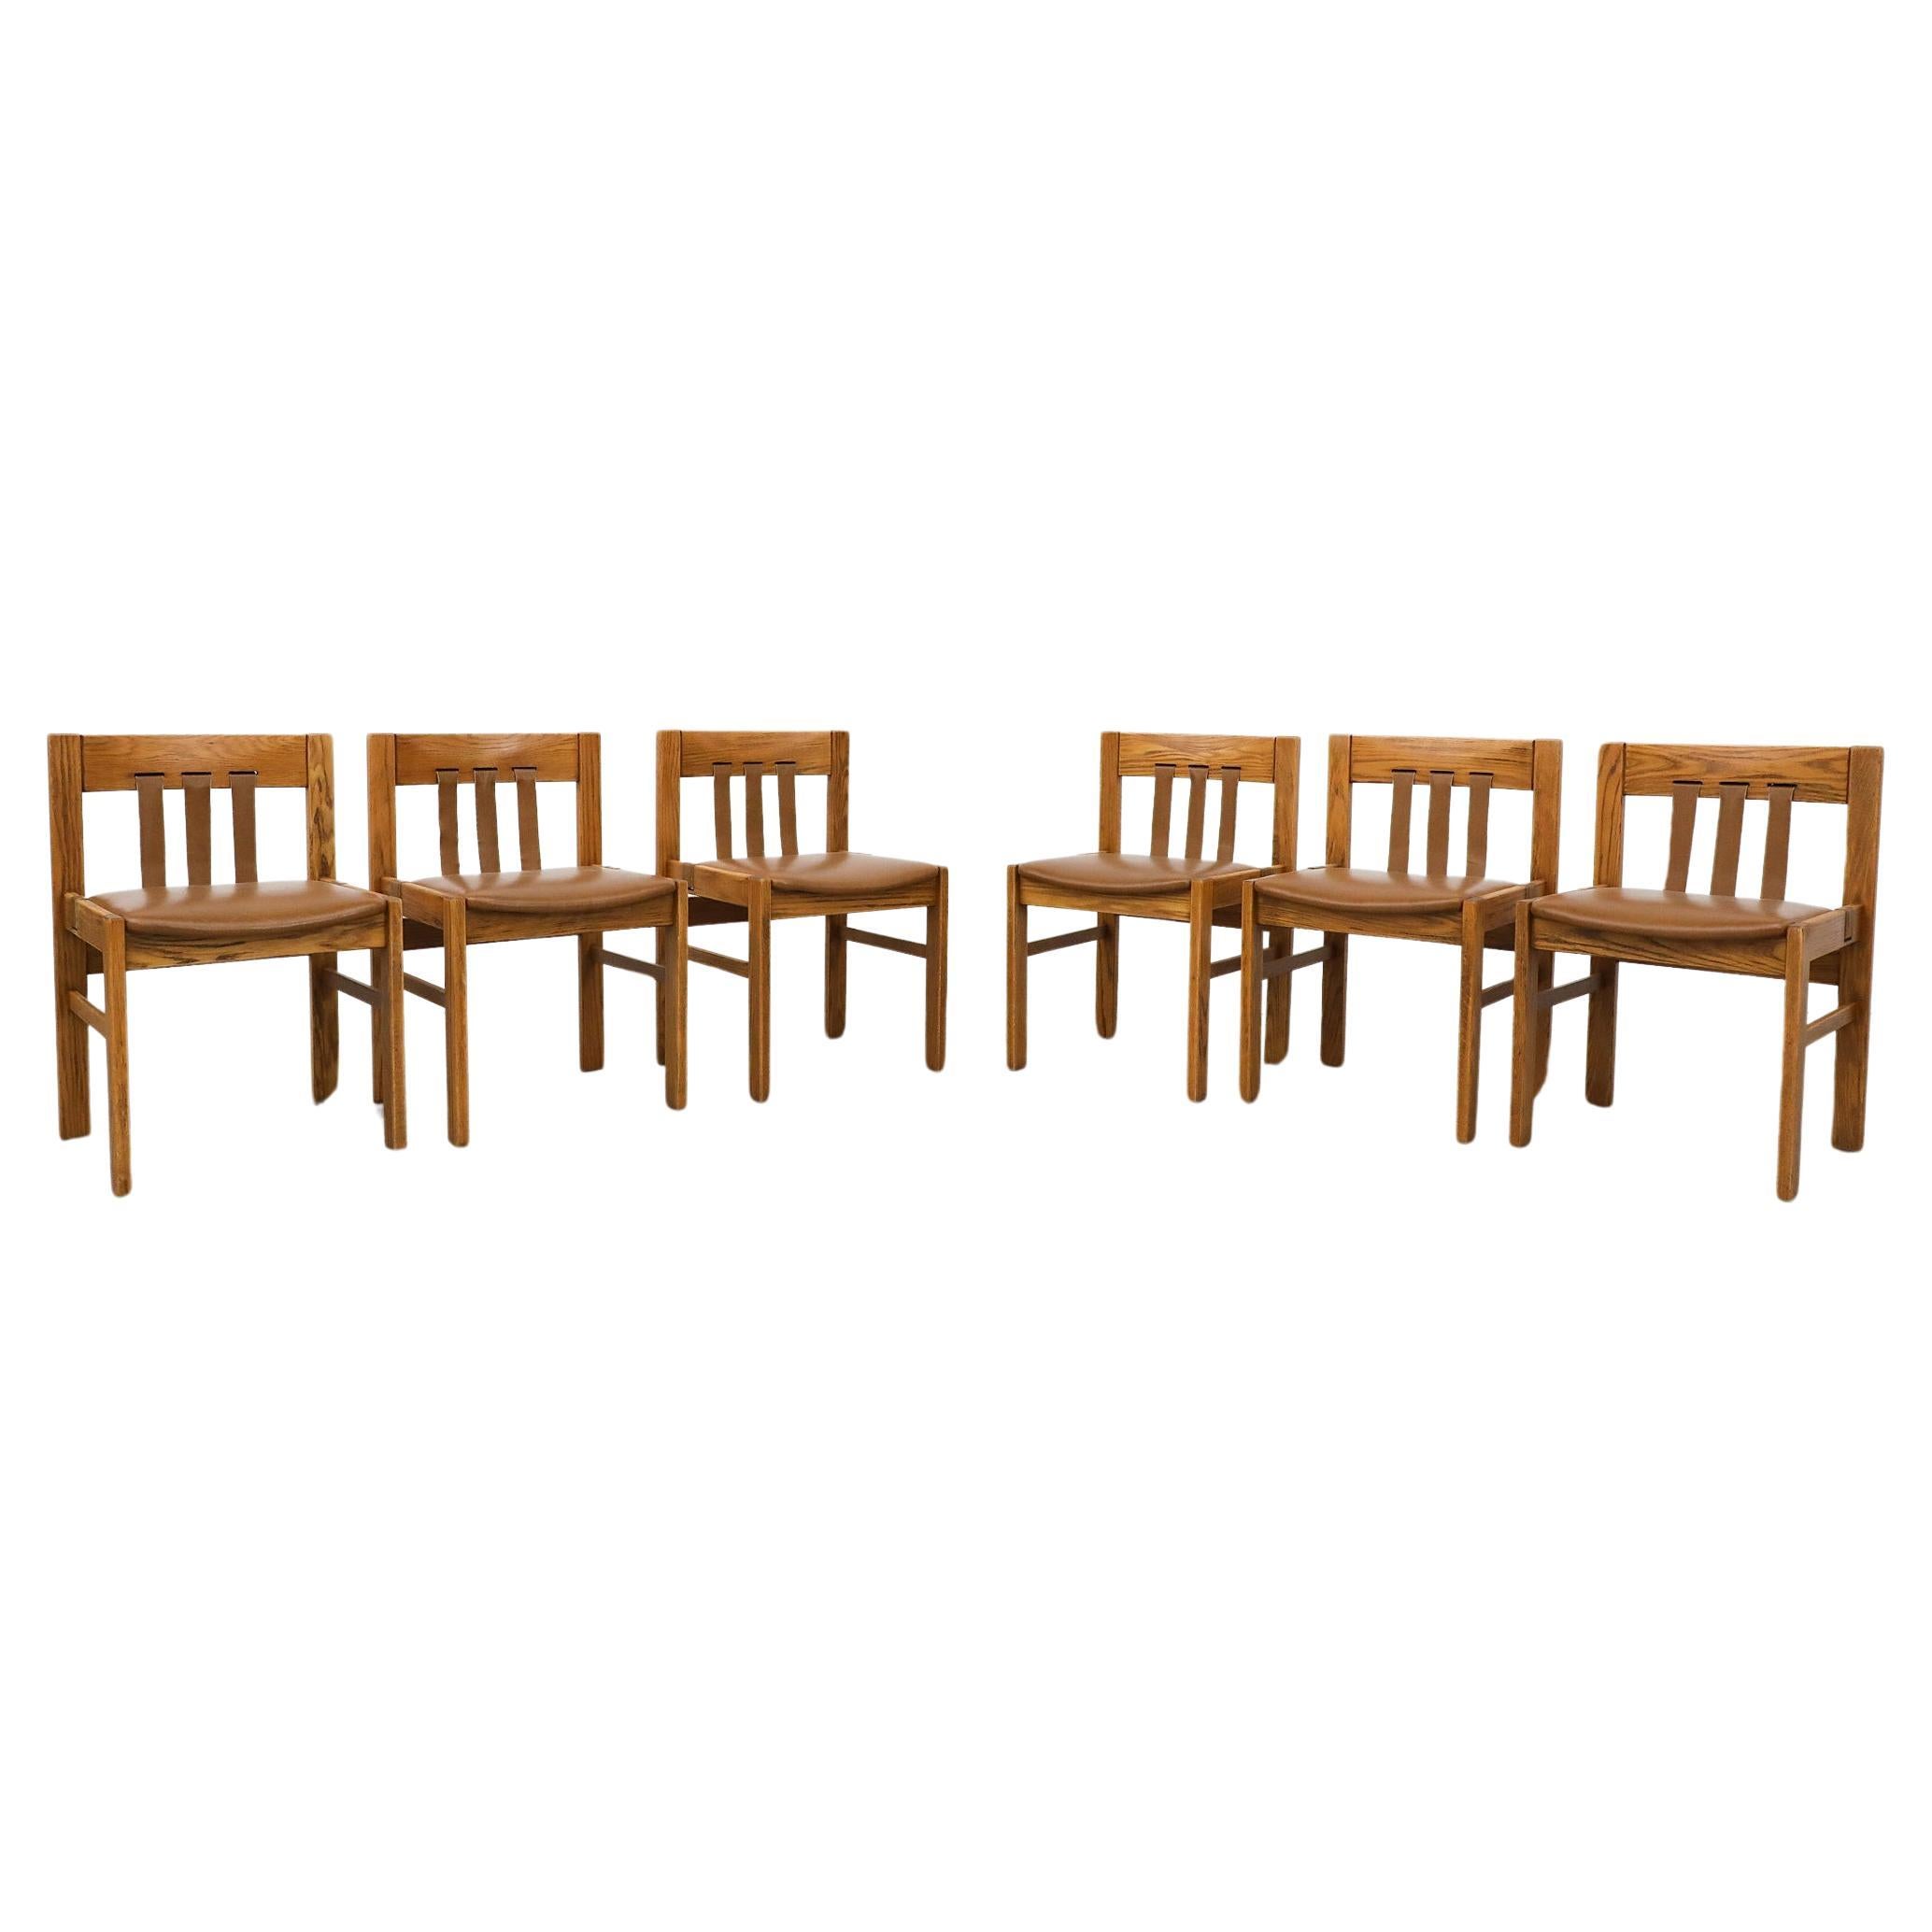 Set of 6 Martin Visser Oak and Leather Dining Chairs by 't Spectrum